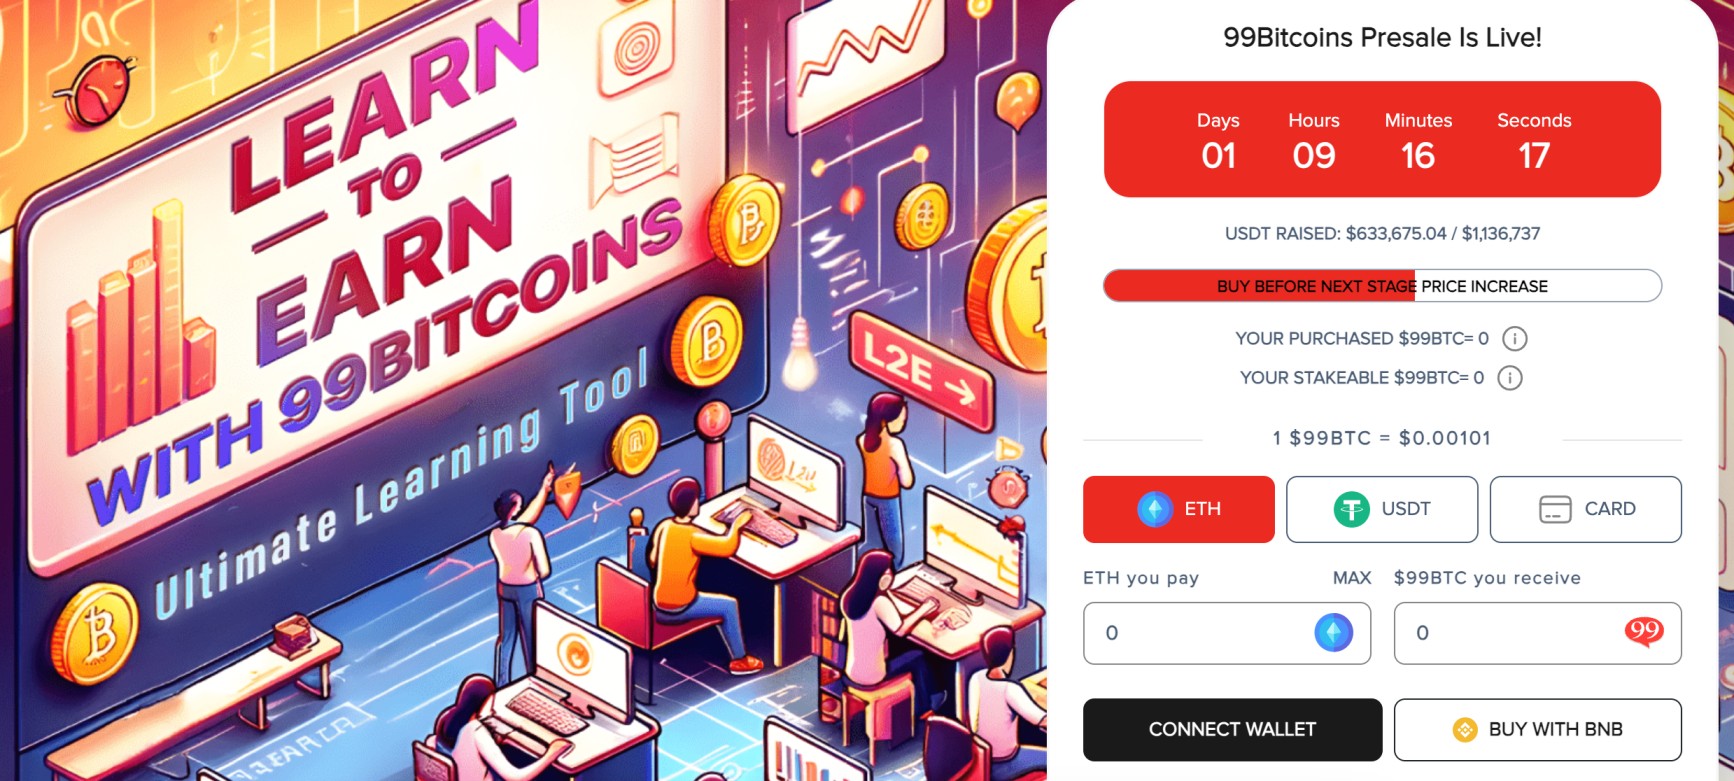 In sensational shake-up to Learn-2-Earn crypto sector, new education ecosystem 99Bitcoins presale has smashed $500k raised for 99BTC token.